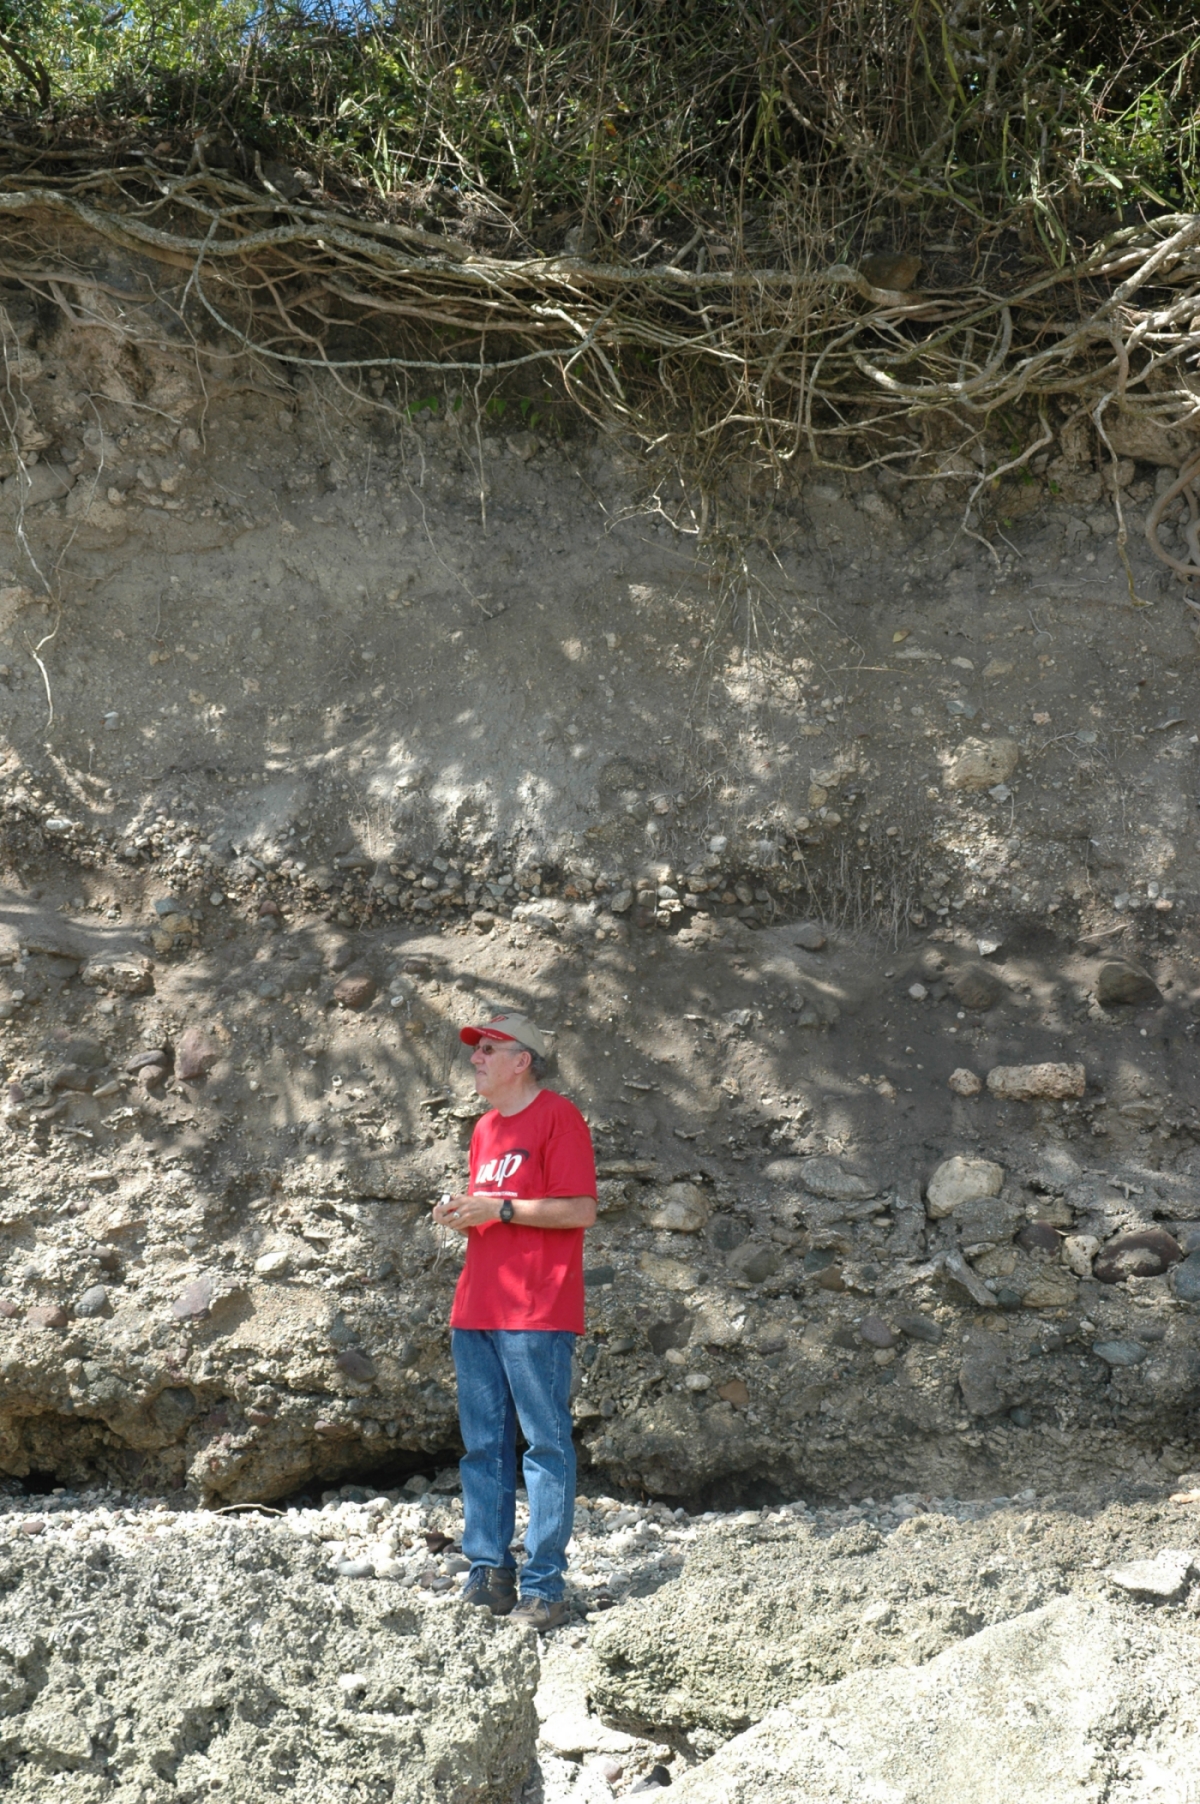 Archaeologist Prof Ezra Zubrow stands beside a coastal cliff eroded by 2004 Indian Ocean tsunami in 2006 (Source: Patrick Daly/Earth Observatory of Singapore)